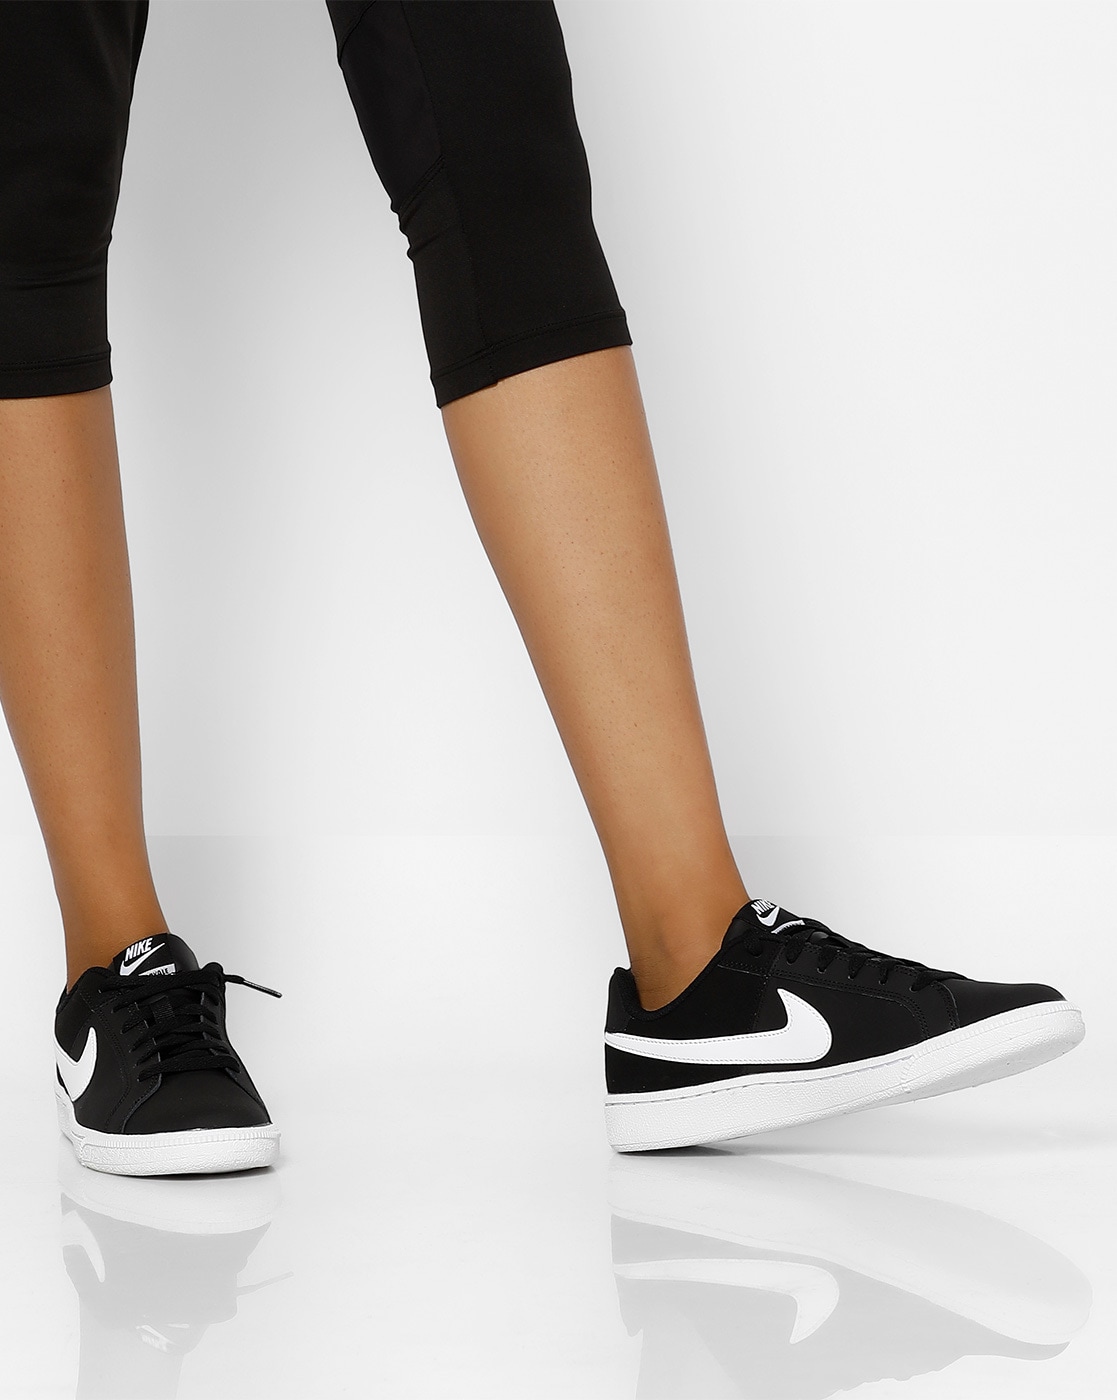 all black casual sneakers womens